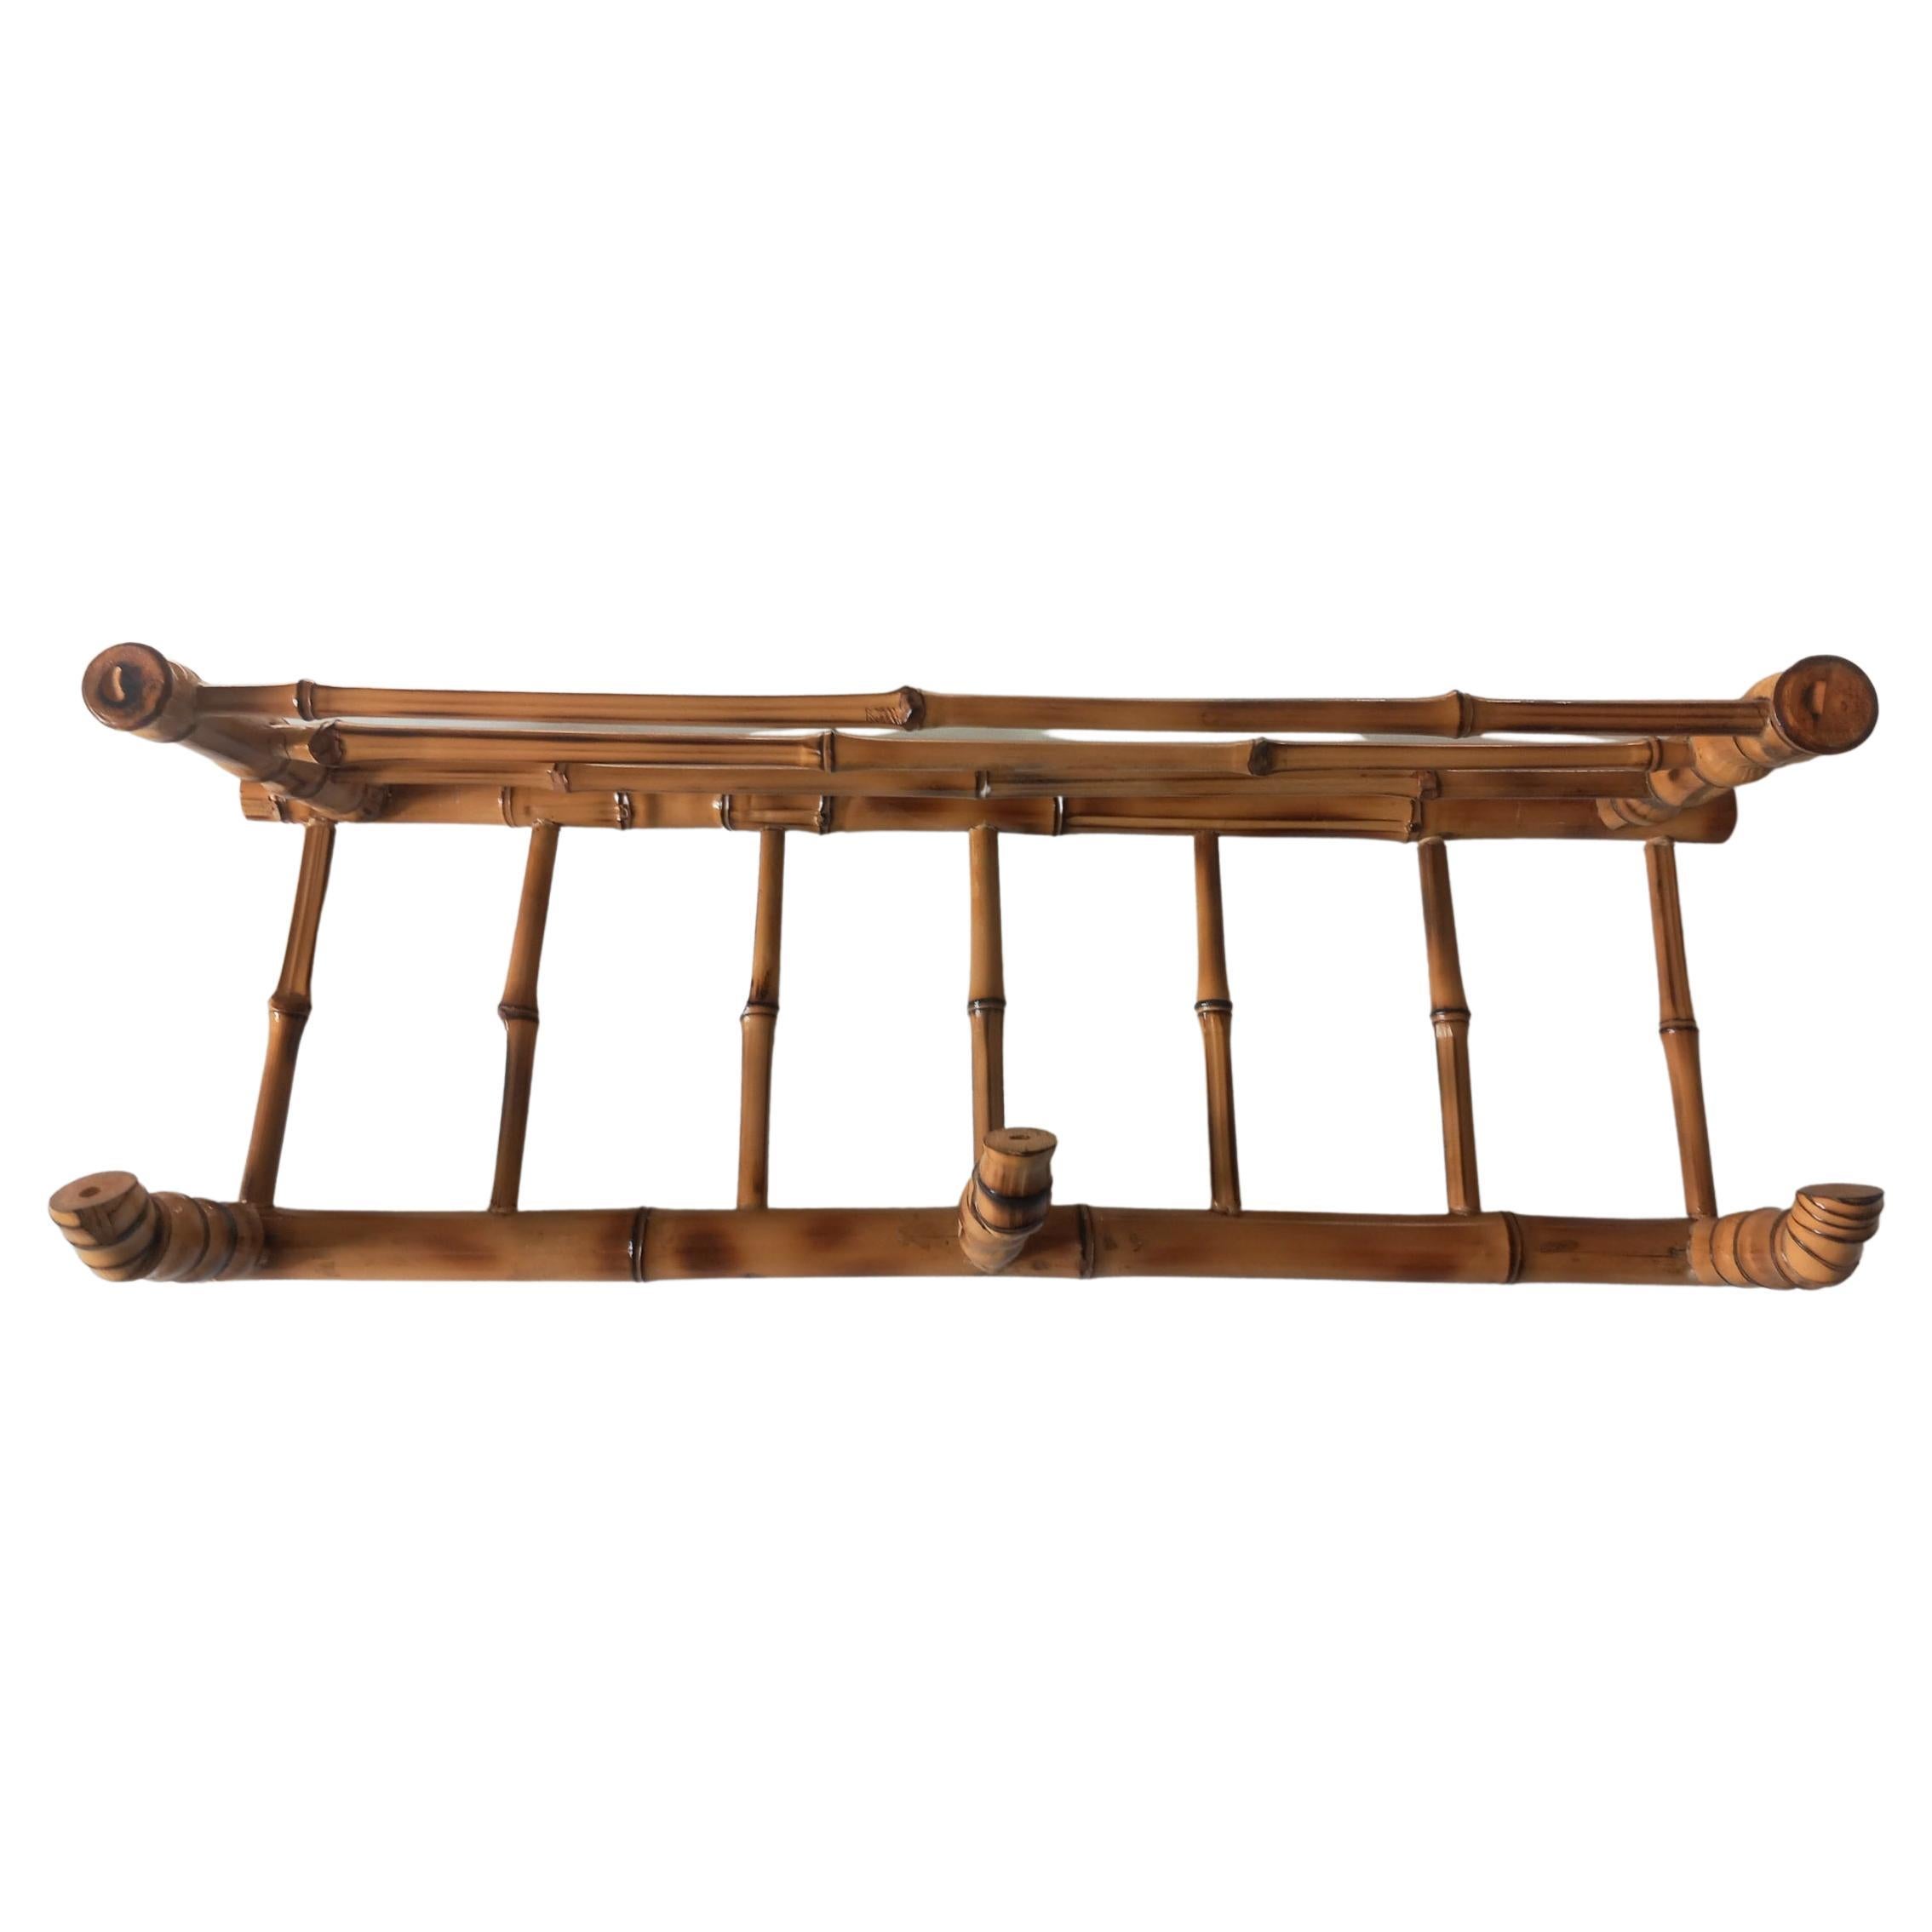 Beautiful Bamboo Coat Rack Three Hangers Top Shelf for Hats or Bags, Spain For Sale 7